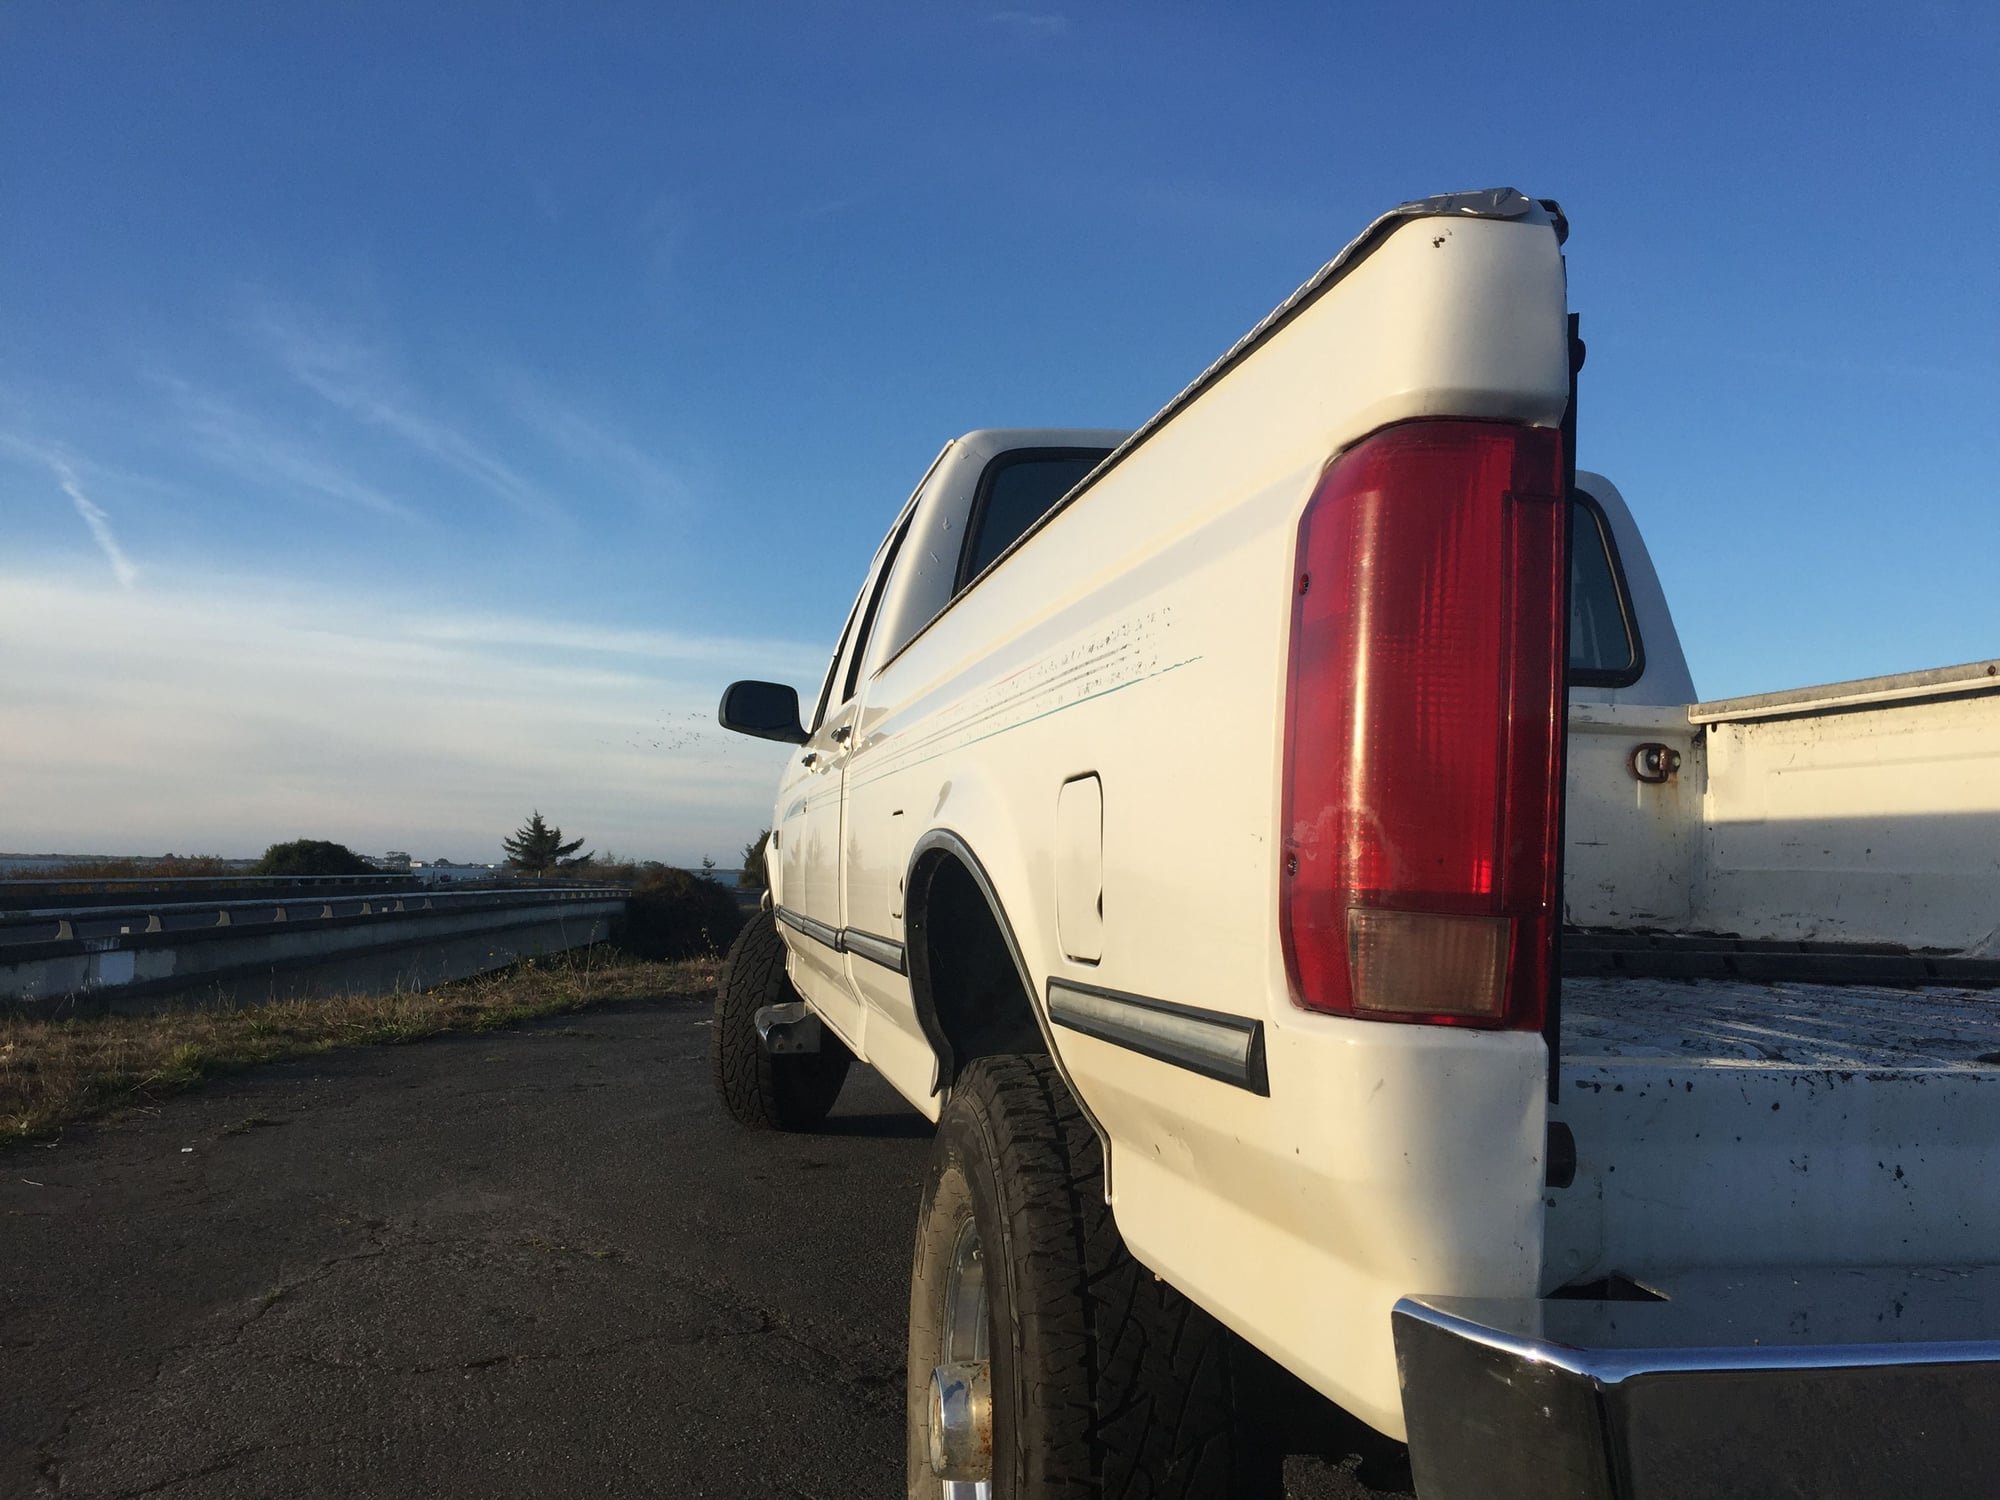 1995 Ford F-350 - 1995 4x4 F350 Kenne Bell supercharged 7.5L - Used - VIN 1FTJW36G0SEA25737 - 110,900 Miles - 8 cyl - 4WD - Automatic - Truck - White - Eureka, CA 95503, United States